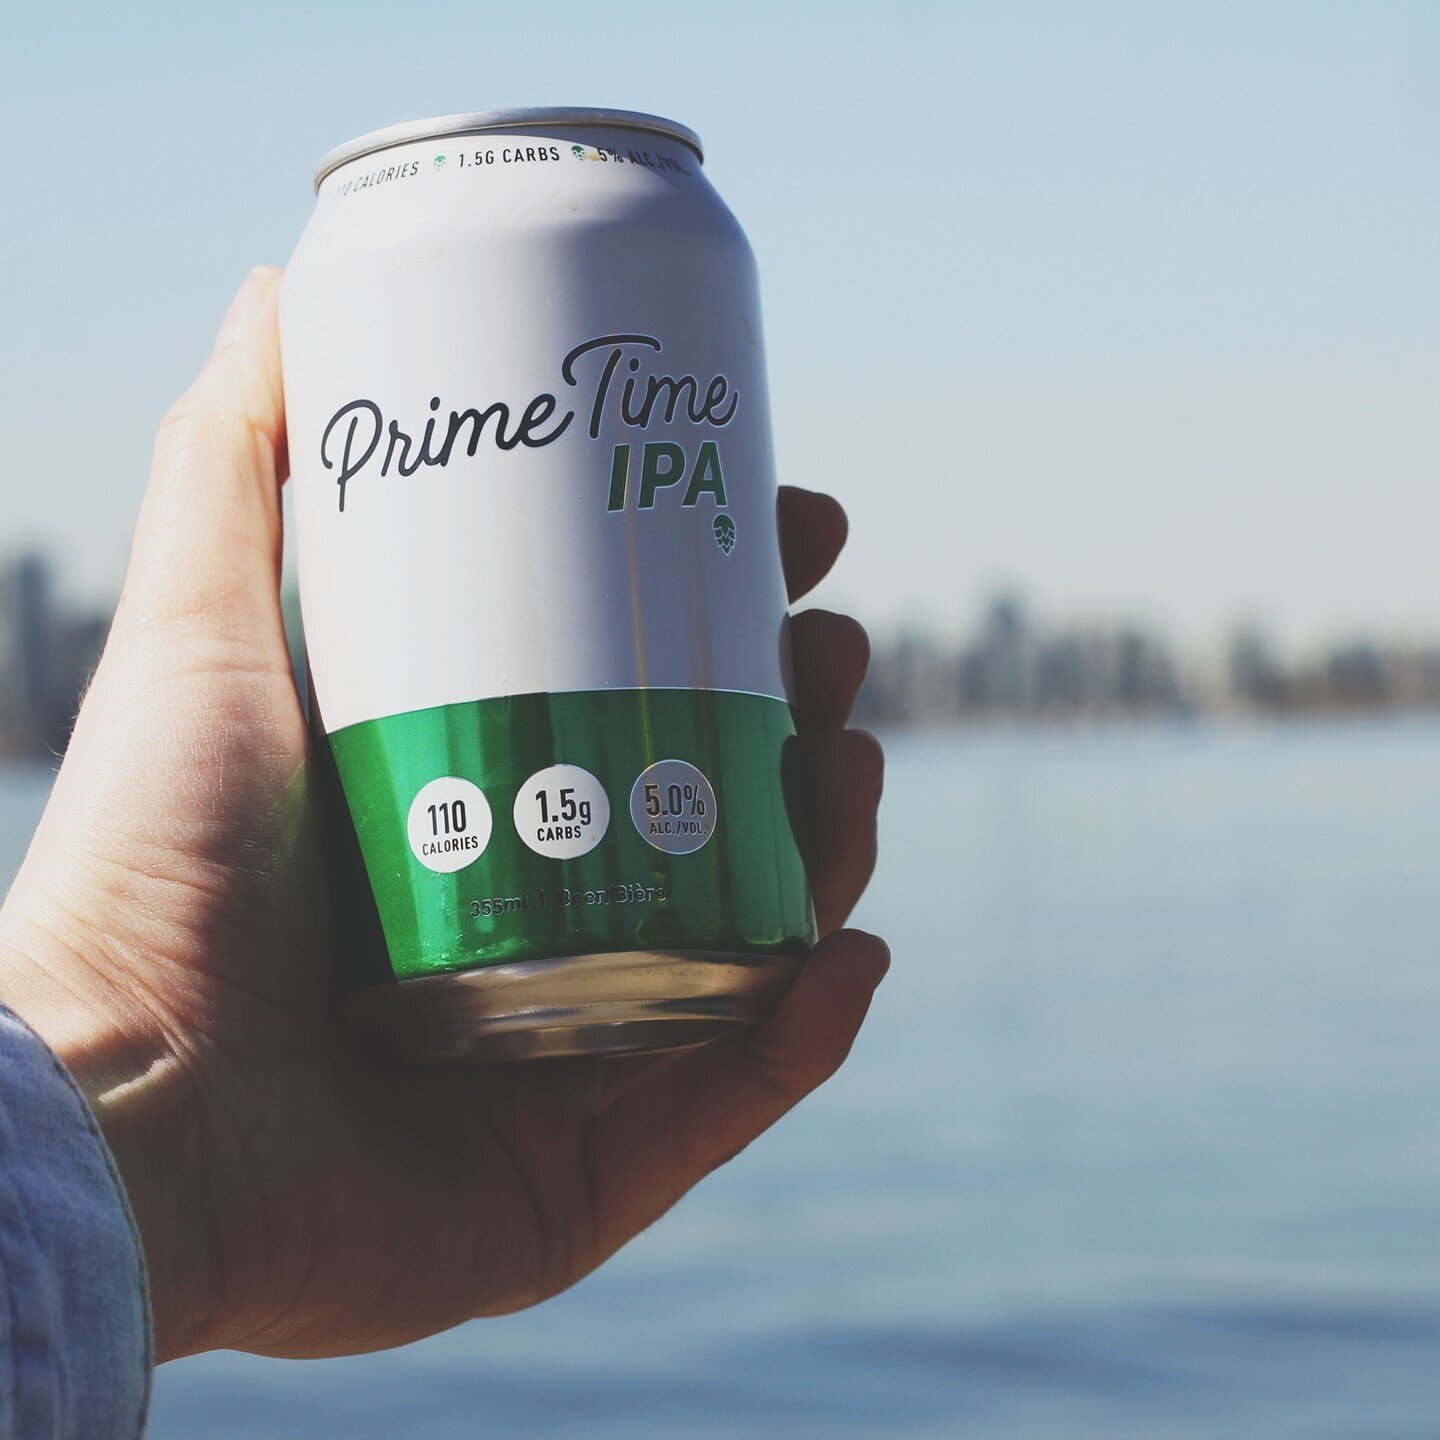 When you're heading into the weekend, are the essentials you're picking up to make the most of it? Well whatever the list is, make sure to have #PrimeTime at the top!